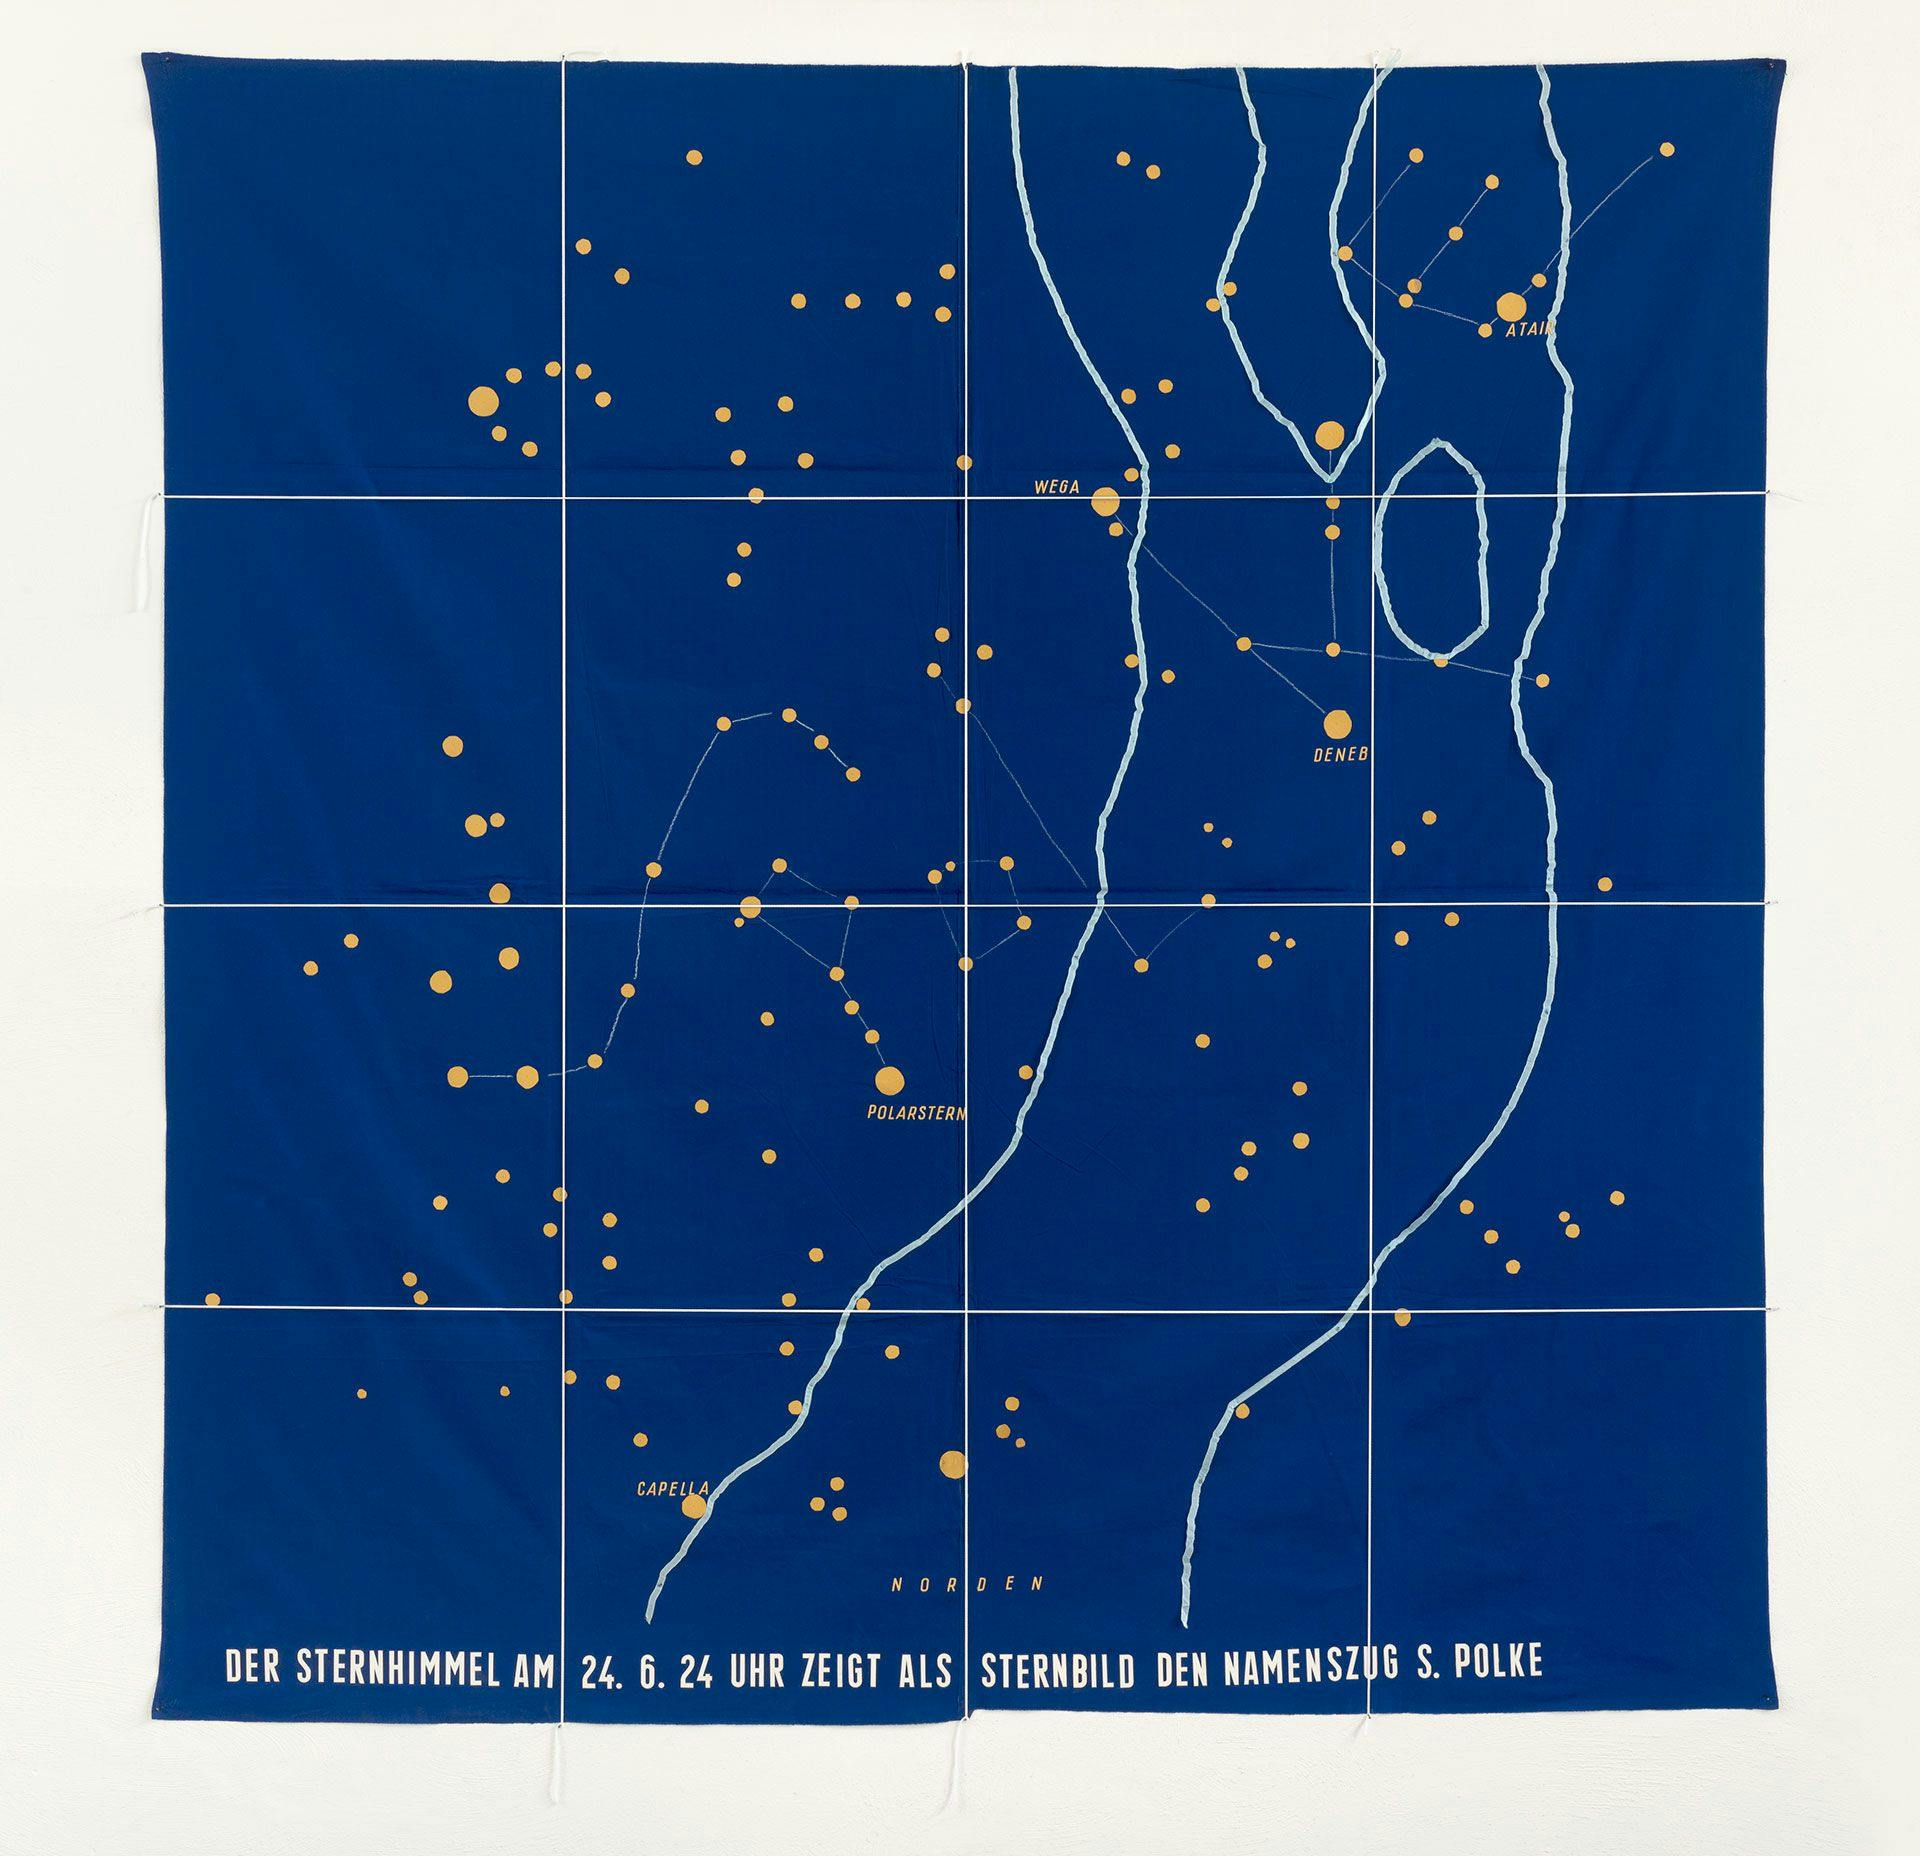 A painting by Sigmar Polke titled Sternhimmeltuch, translated as Starry Heavens Cloth, dated 1968.